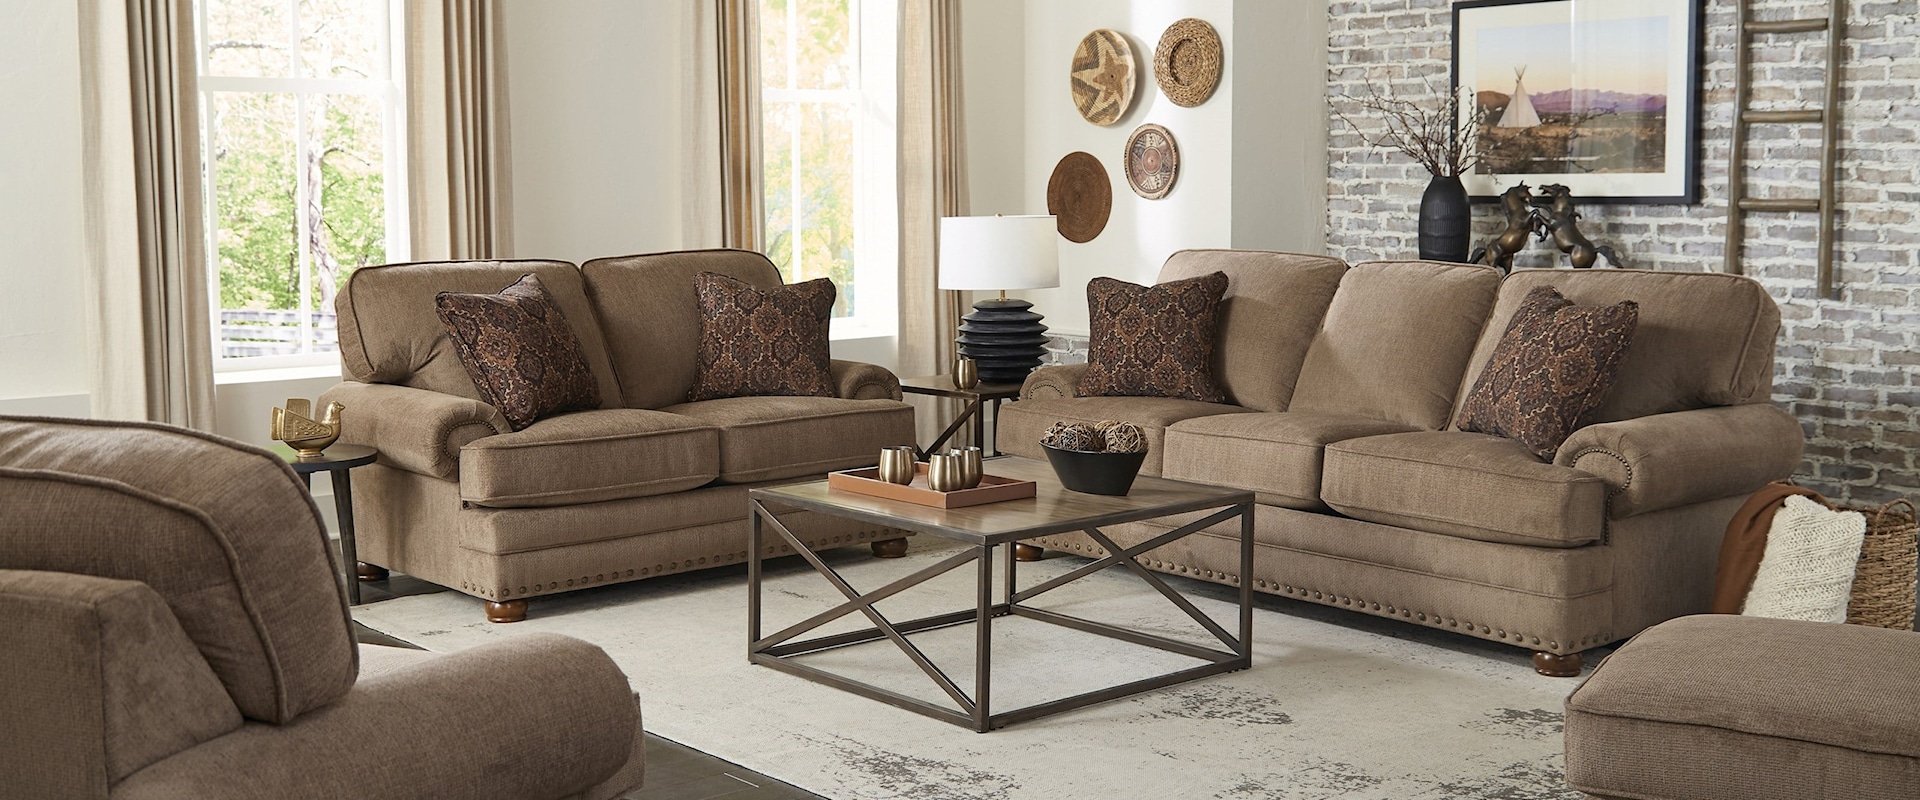 Traditional 4-Piece Living Room Set with Rolled Arms and Nailhead Trimming